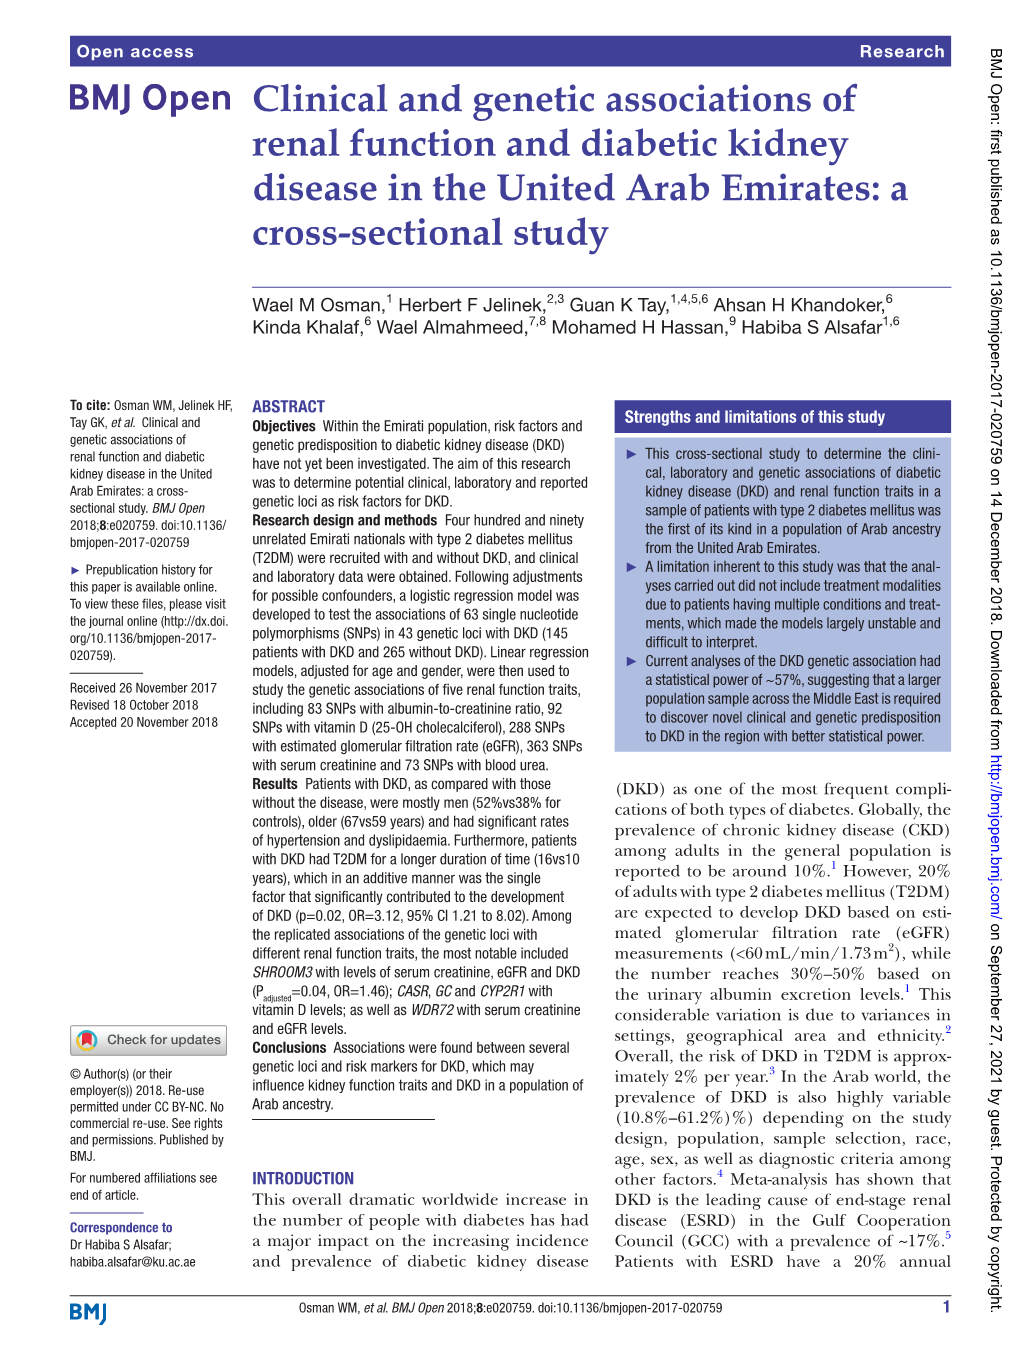 Clinical and Genetic Associations of Renal Function and Diabetic Kidney Disease in the United Arab Emirates: a Cross-Sectional Study